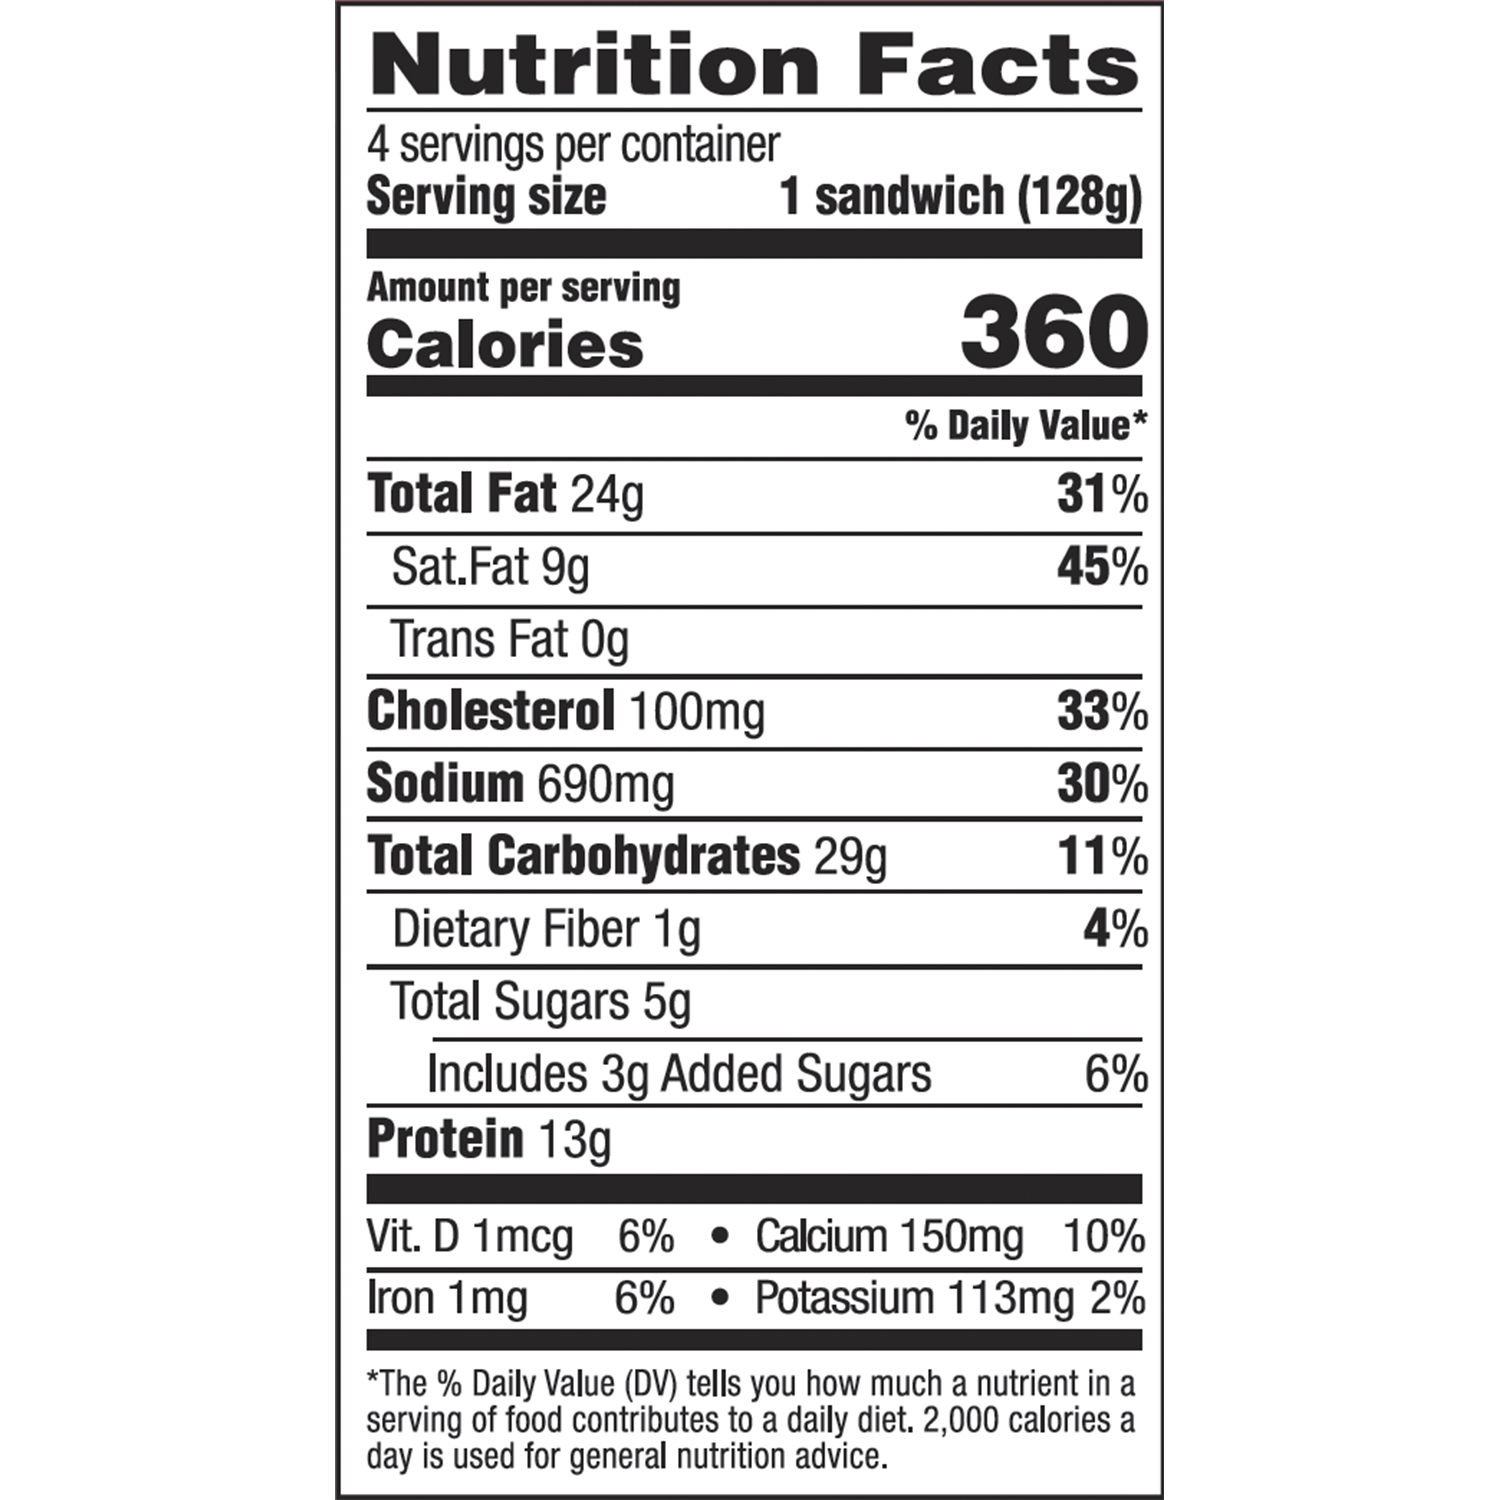 Nutrition Facts for Swaggerty's Sausage Egg and Cheese Croissant